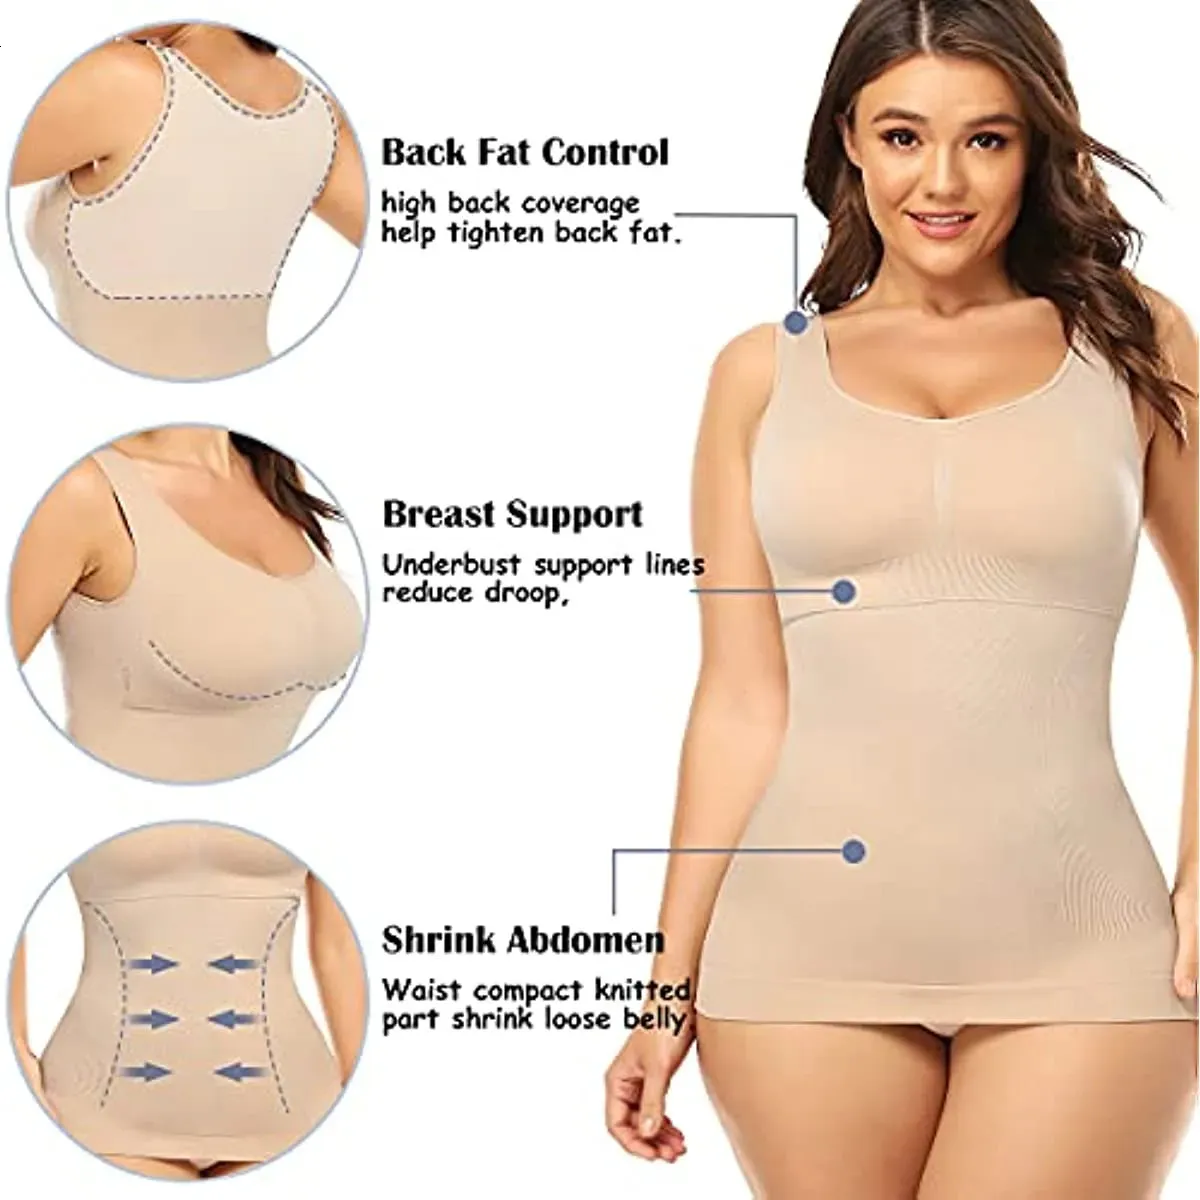 Plus Size Womens Low Waist Body Shaper With Built In Bra Tank Top Control  Camisole For Slimming And Compression Undershirt Style 231012 From Niao07,  $9.48